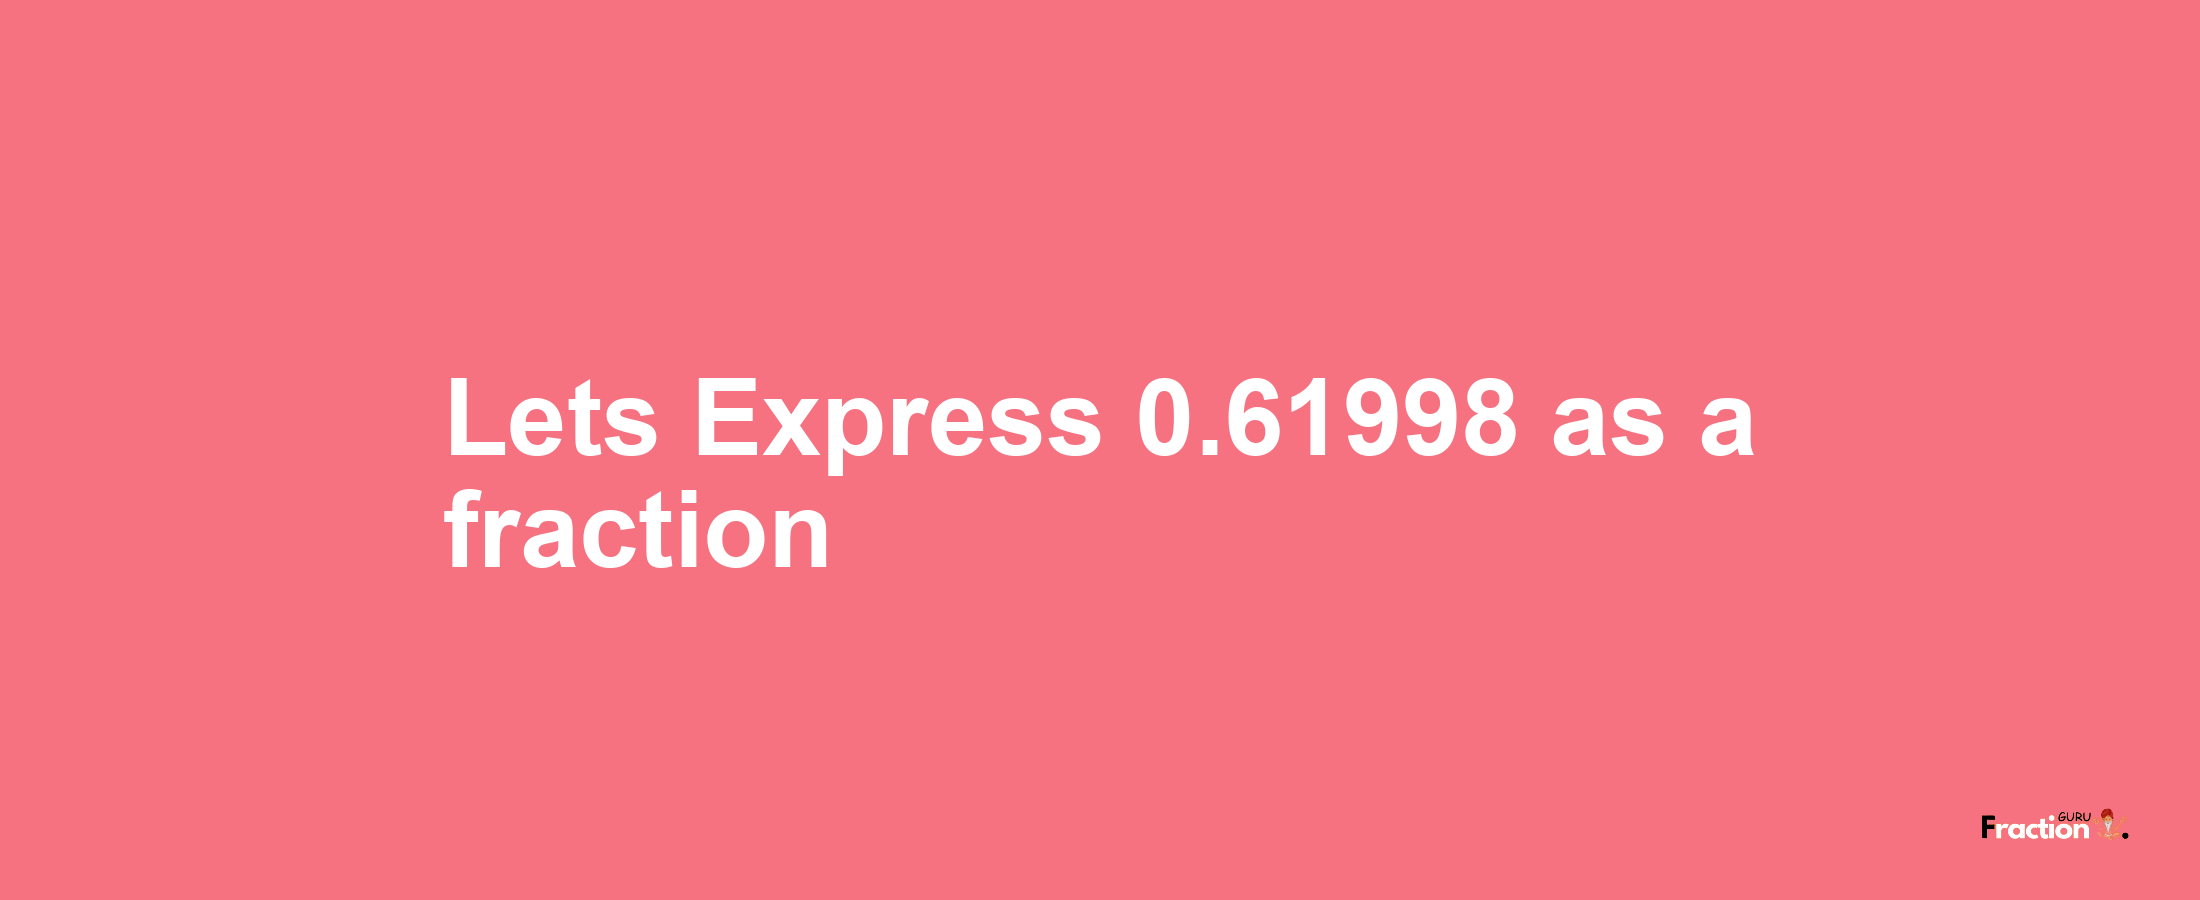 Lets Express 0.61998 as afraction